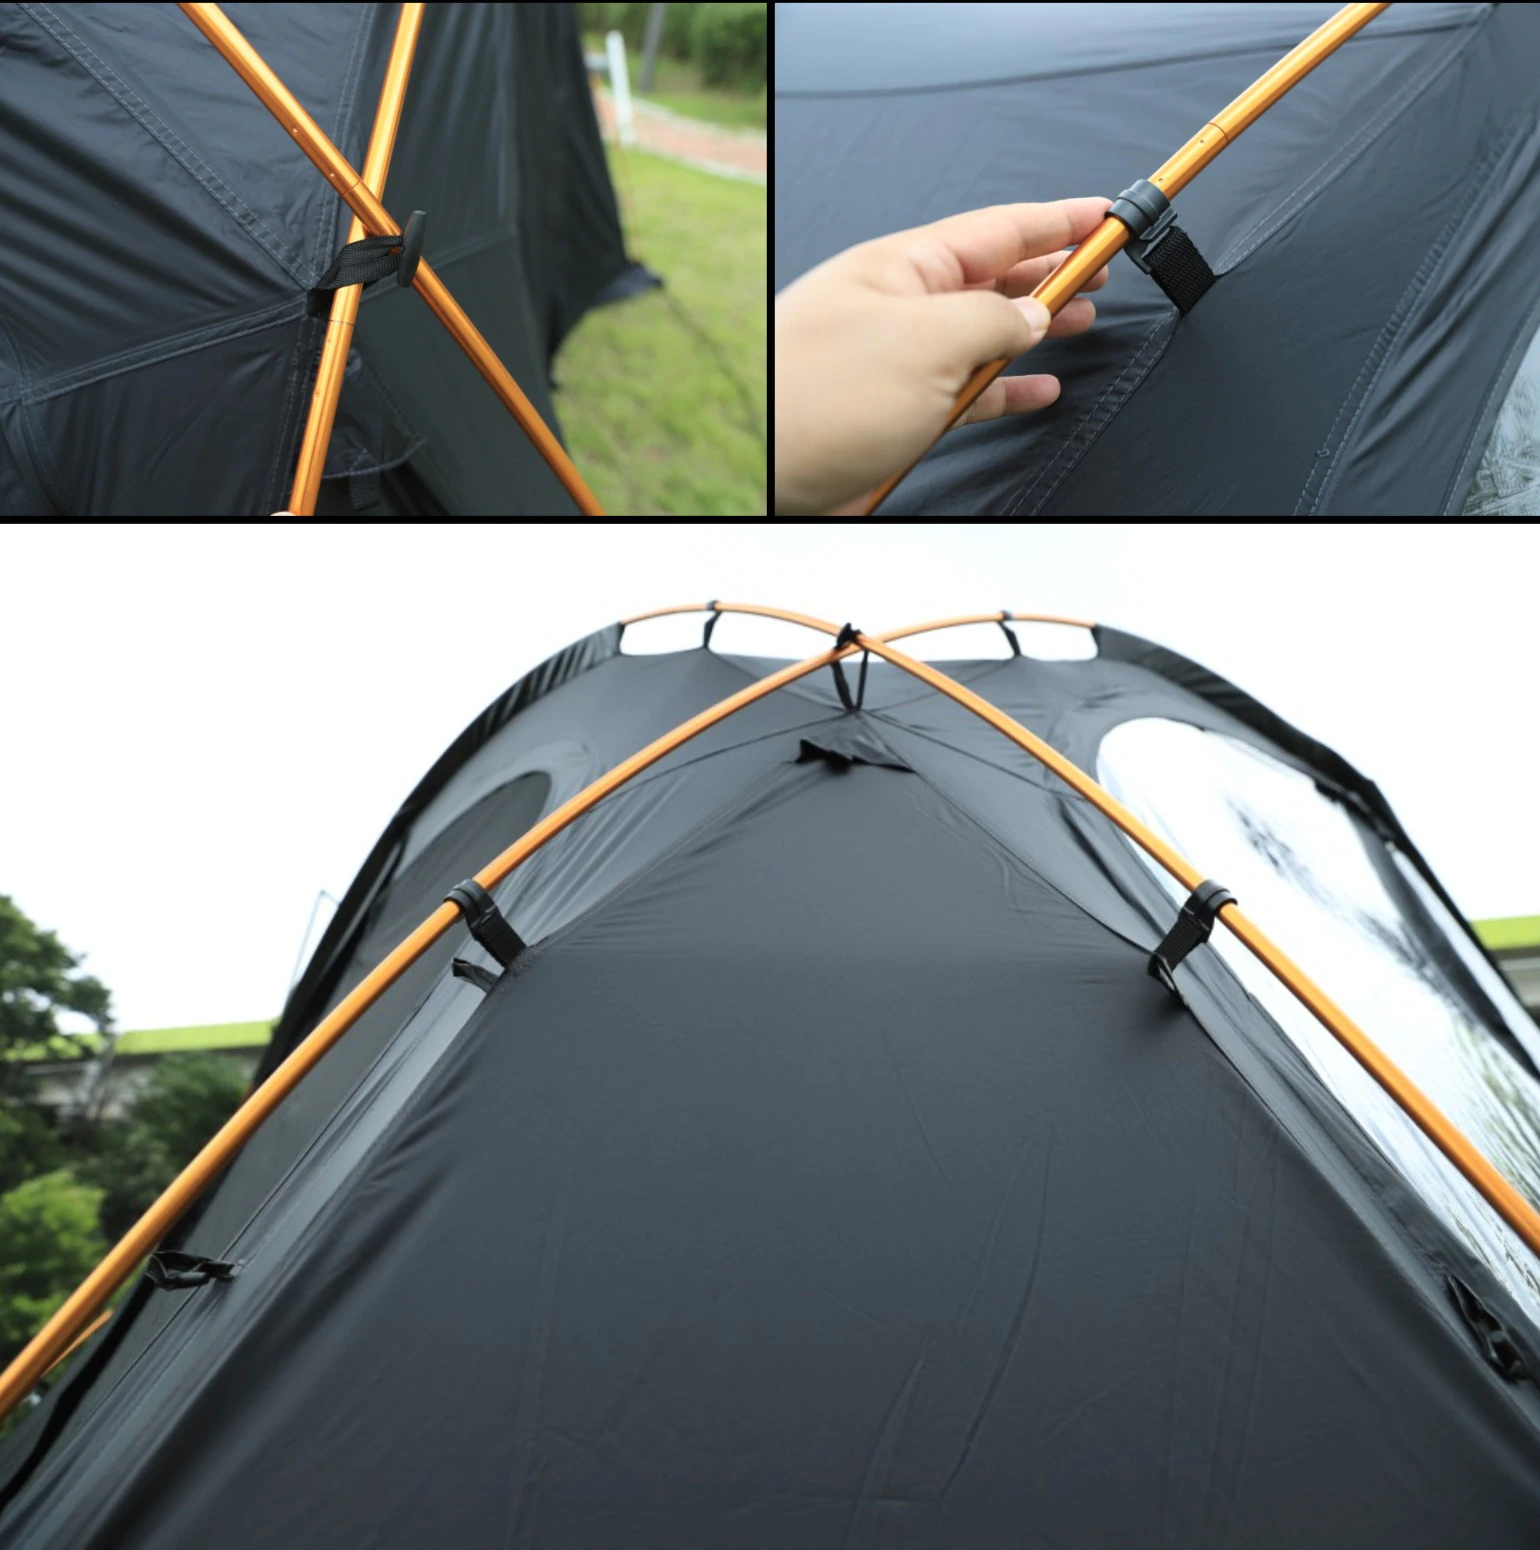 Cheap Goat Tents Outdoor Convenient Folding Octagonal Tent Thickened Awning Camp Outdoor Picnic Rainproof And Mosquito Proof Camping Equipment